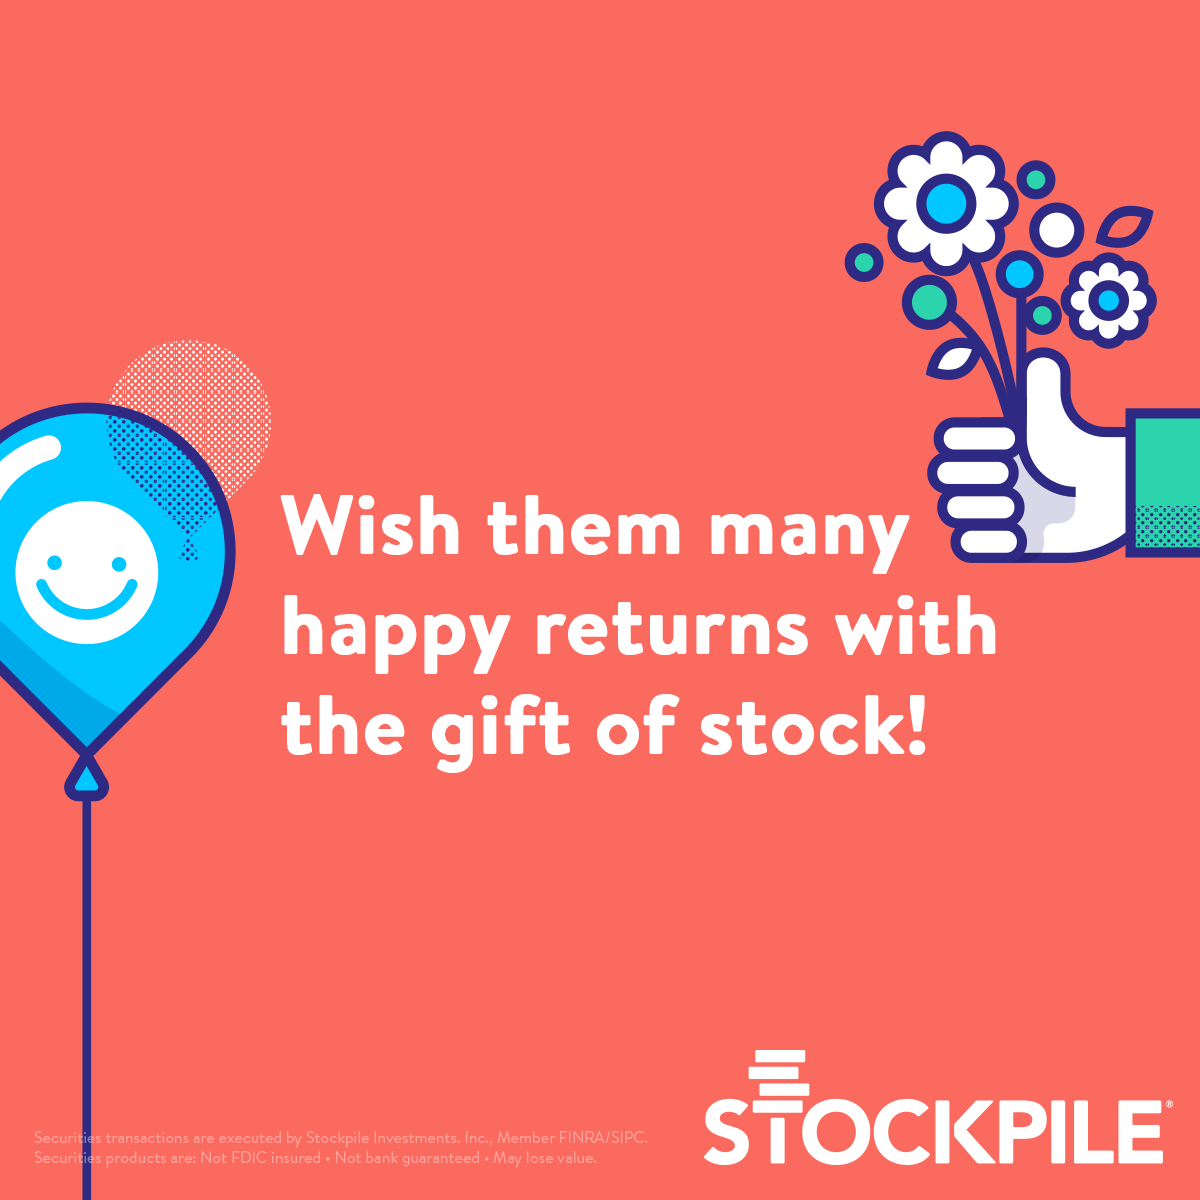 How To Buy Stock As a Gift